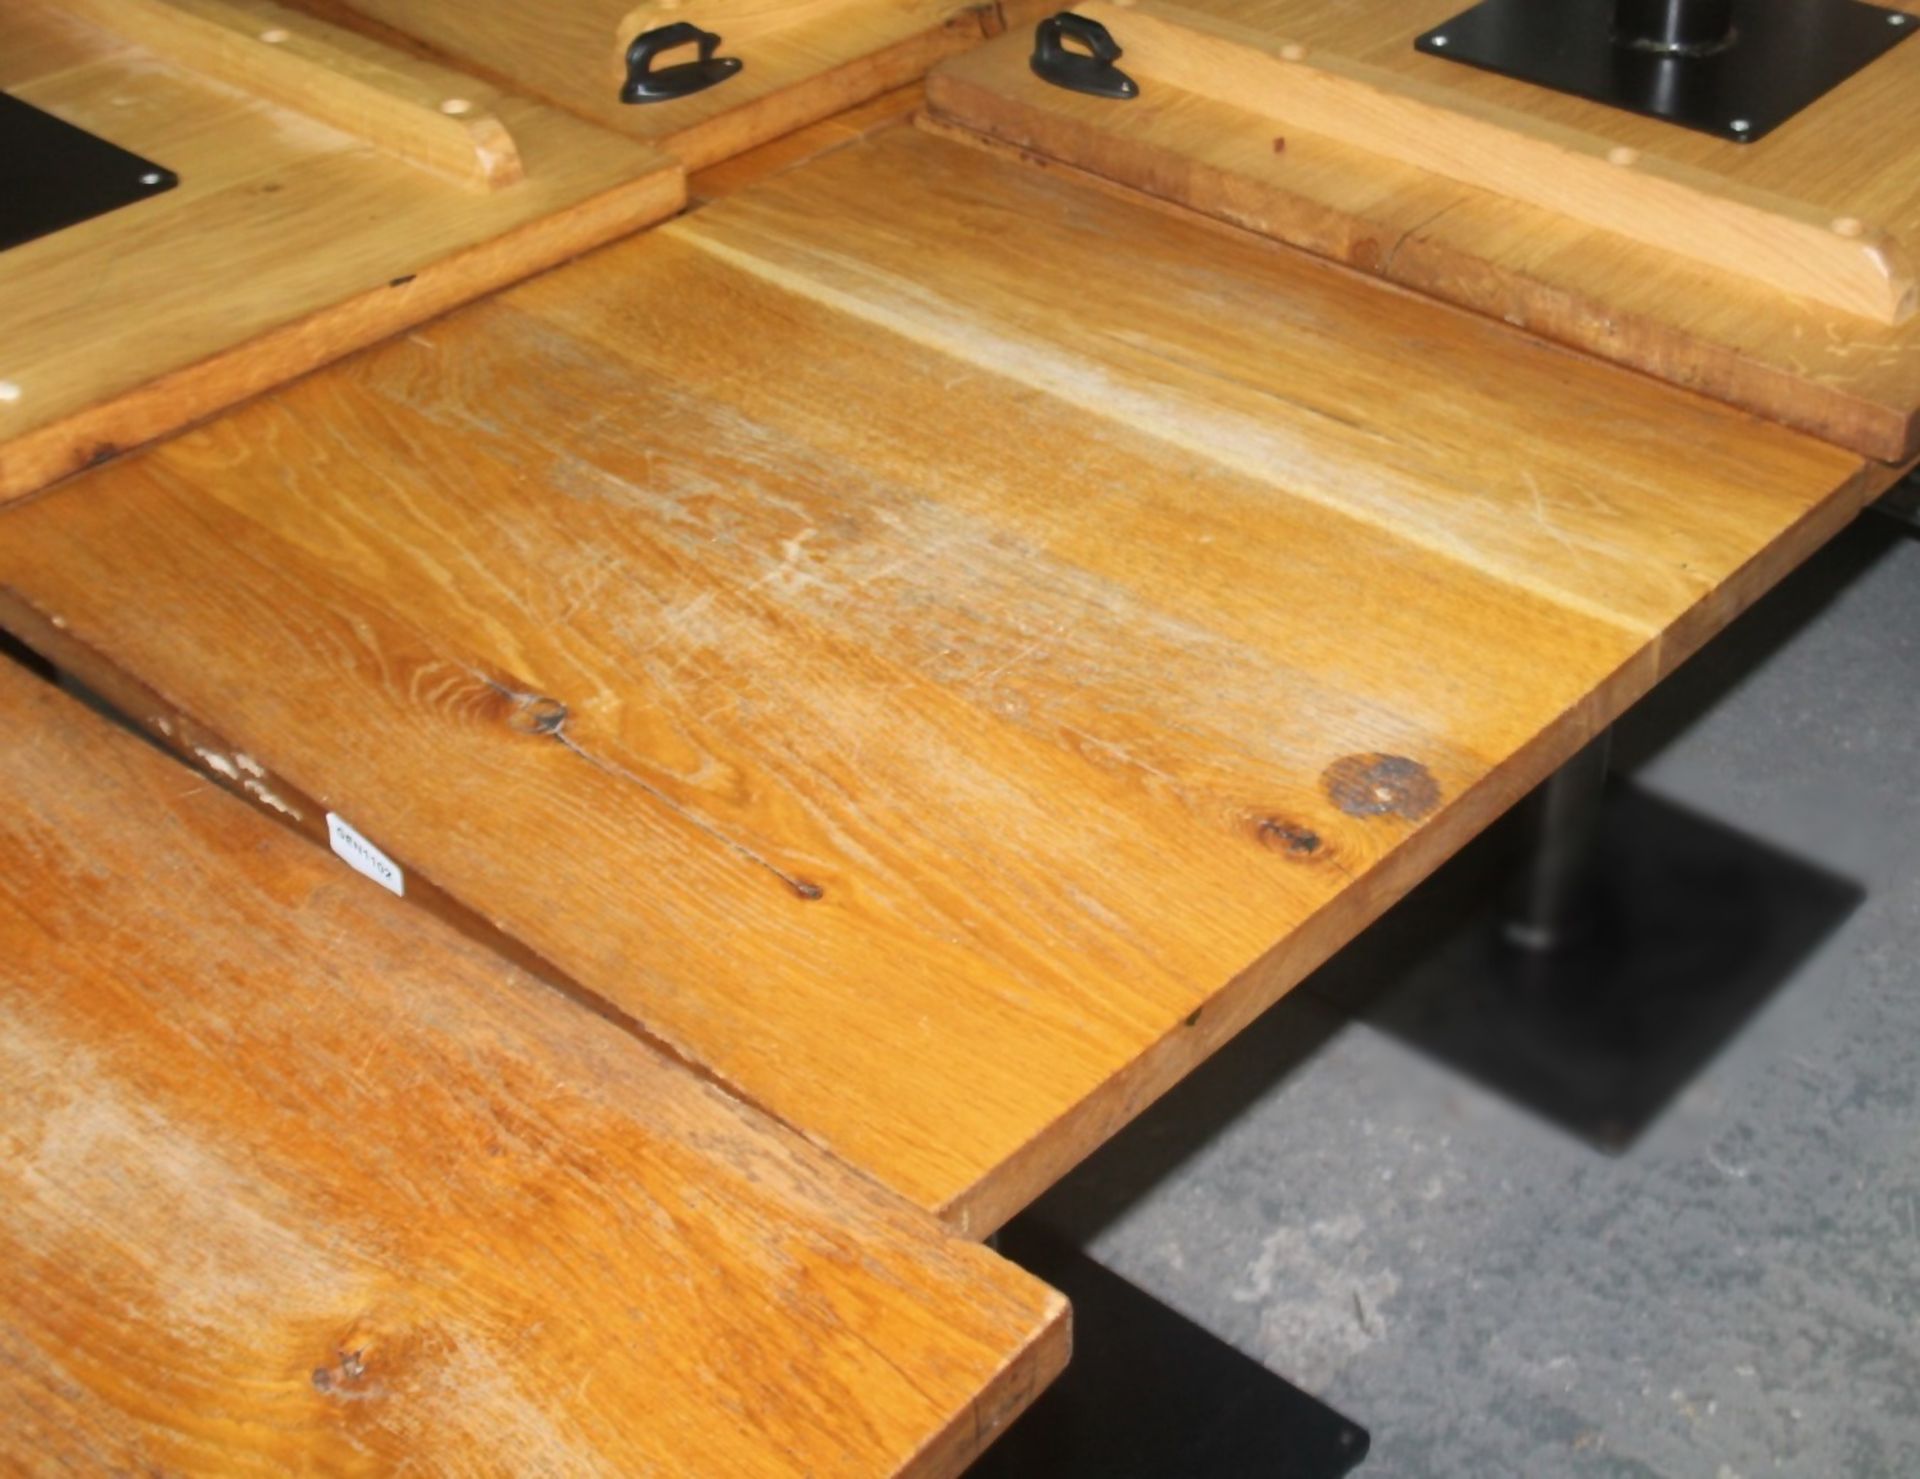 4 x Solid Oak Restaurant Dining Tables - Natural Rustic Knotty Oak Tops With Black Cast Iron Bases - - Image 3 of 4